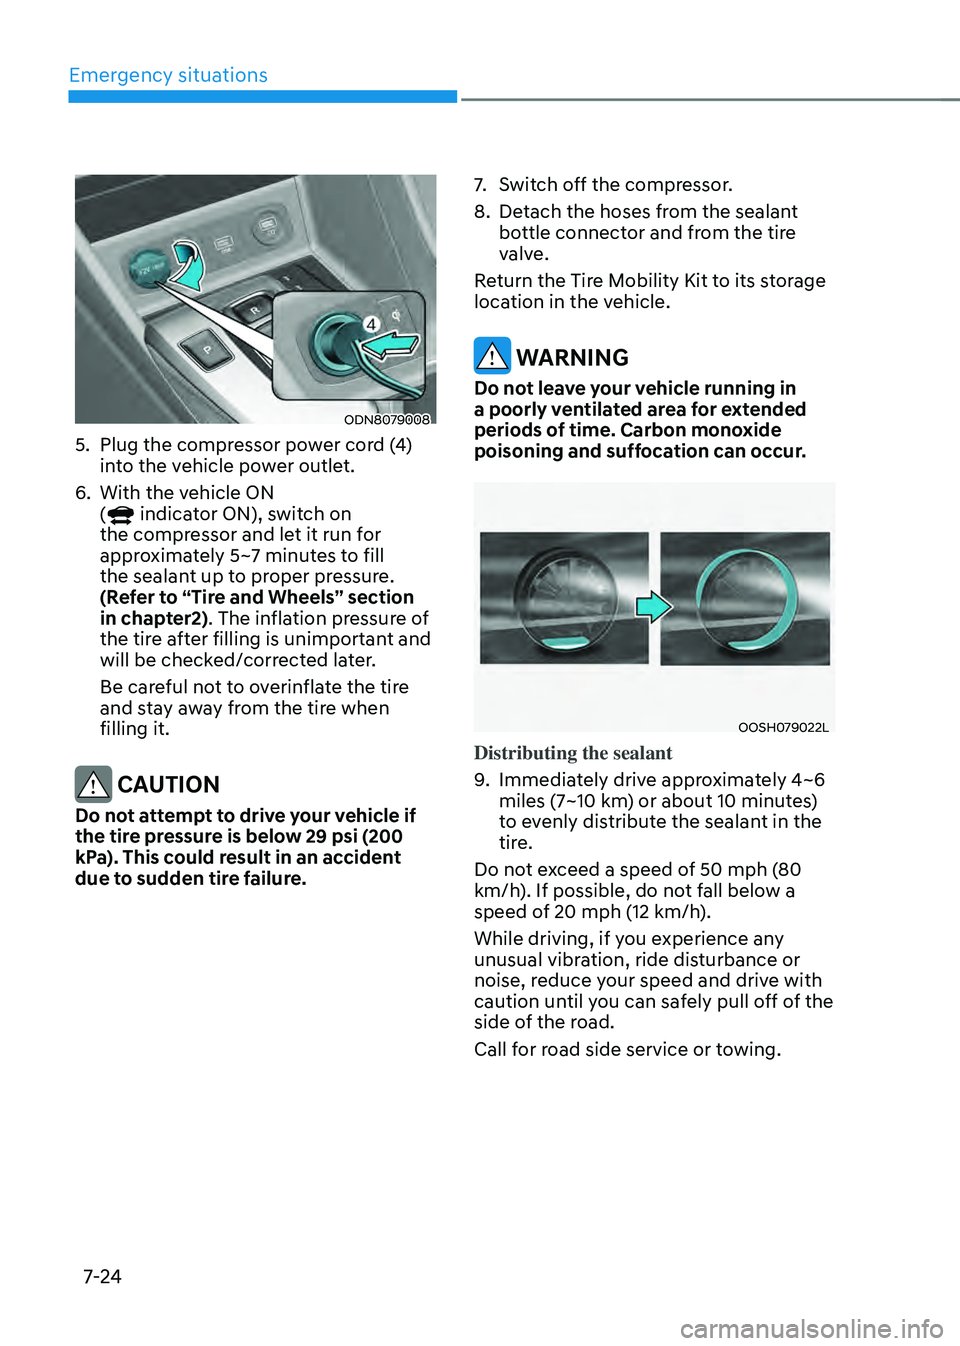 HYUNDAI SONATA HYBRID 2022  Owners Manual Emergency situations
7-24
ODN8079008
5. Plug the compressor power cord (4) 
into the vehicle power outlet.
6. With the vehicle ON 
( indicator ON), switch on 
the compressor and let it run for 
approx